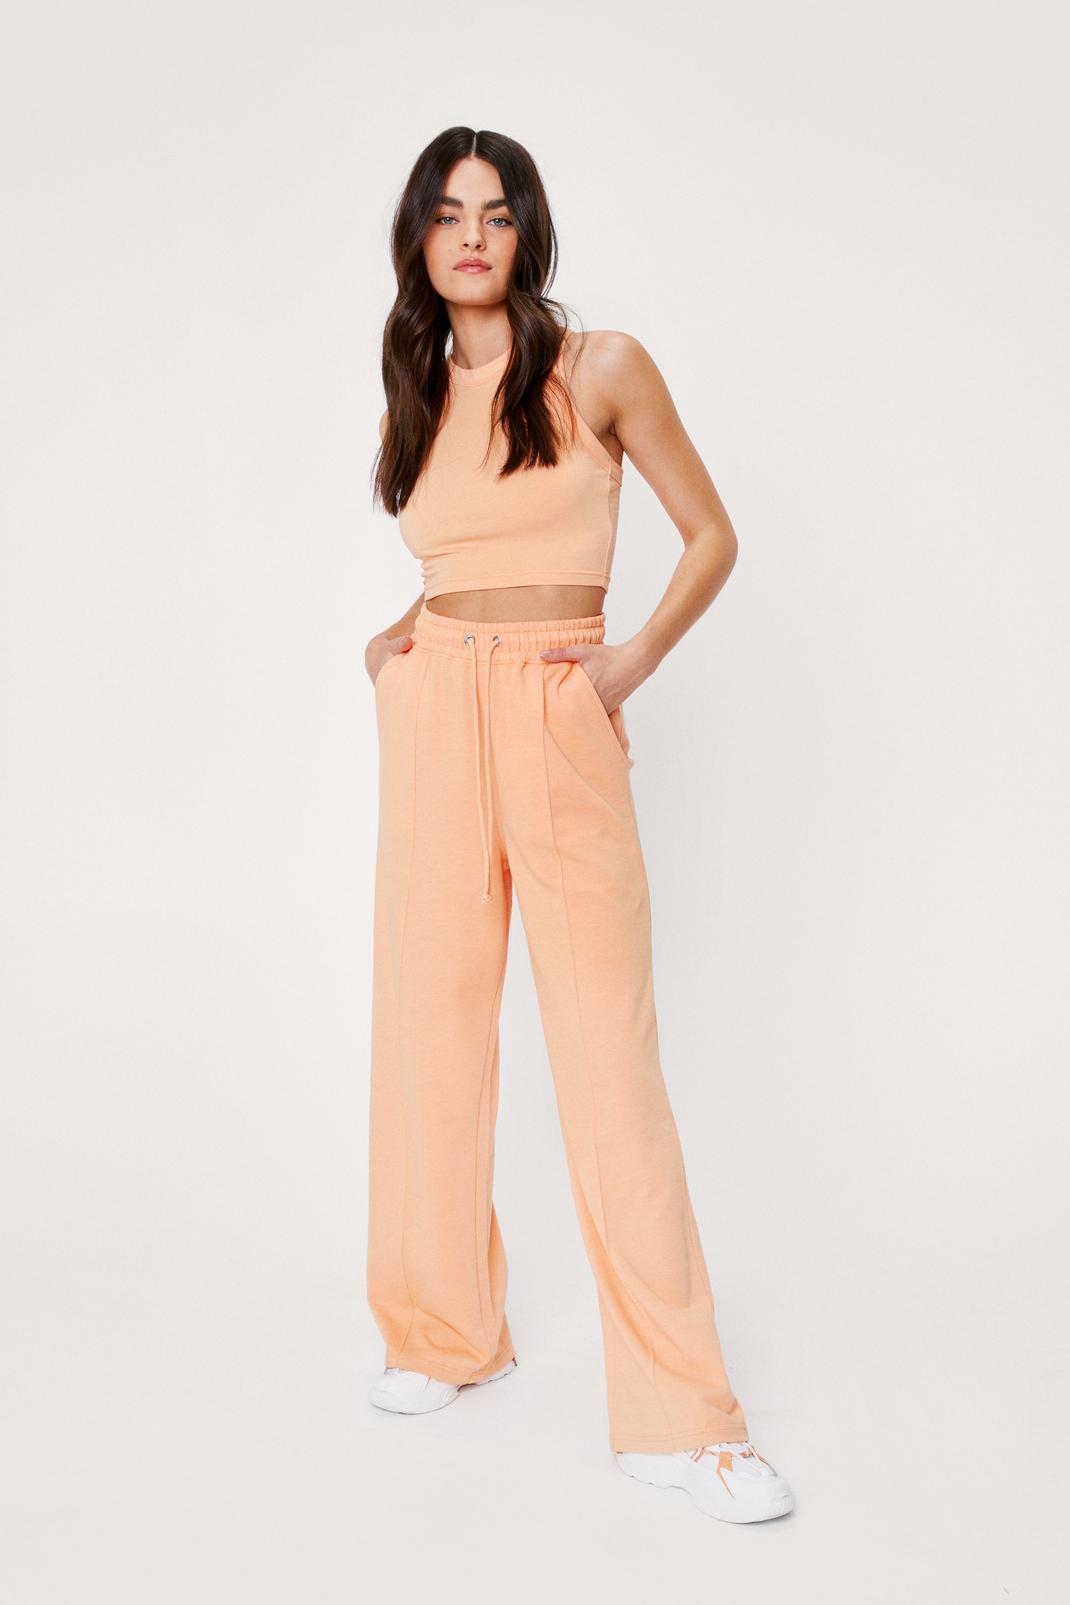 Apricot Racerback Crop Top and Wide Leg Lounge Set image number 1